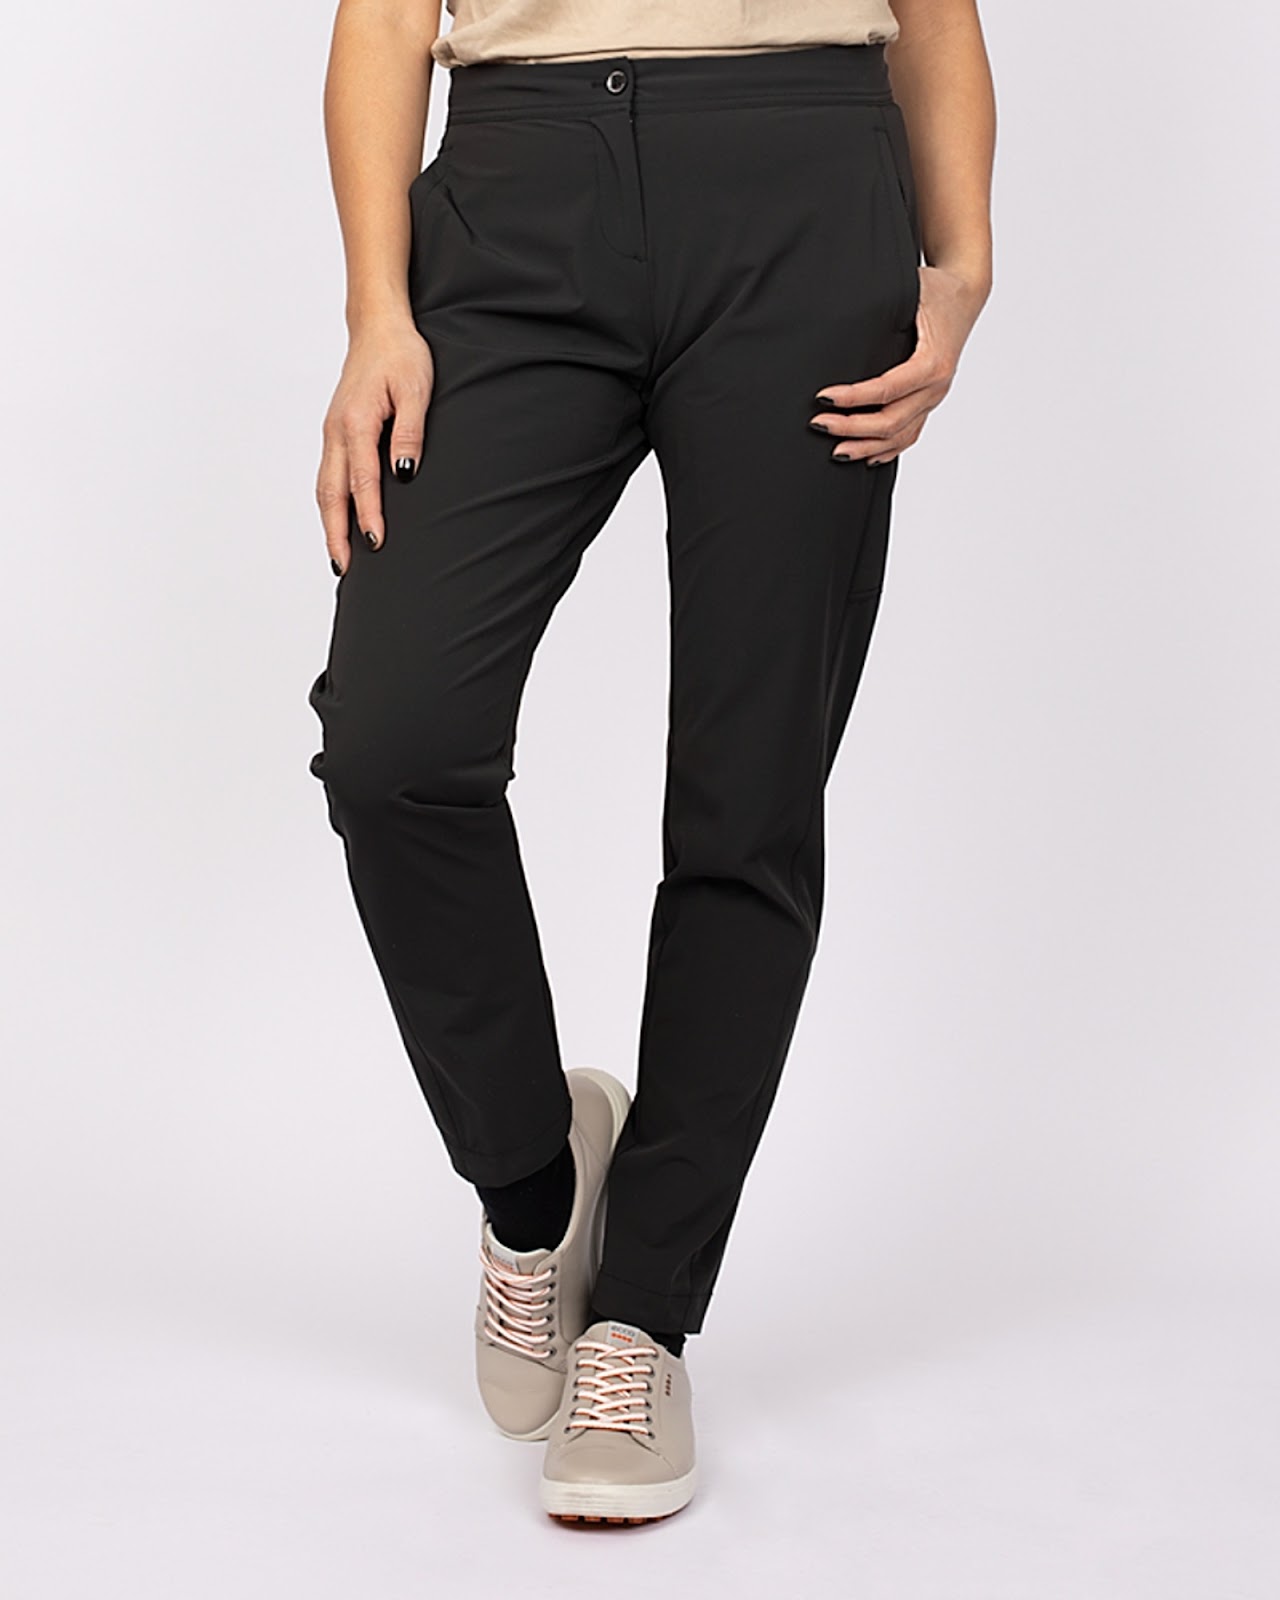 Cutter & Buck Womens Response Pants for holiday parties